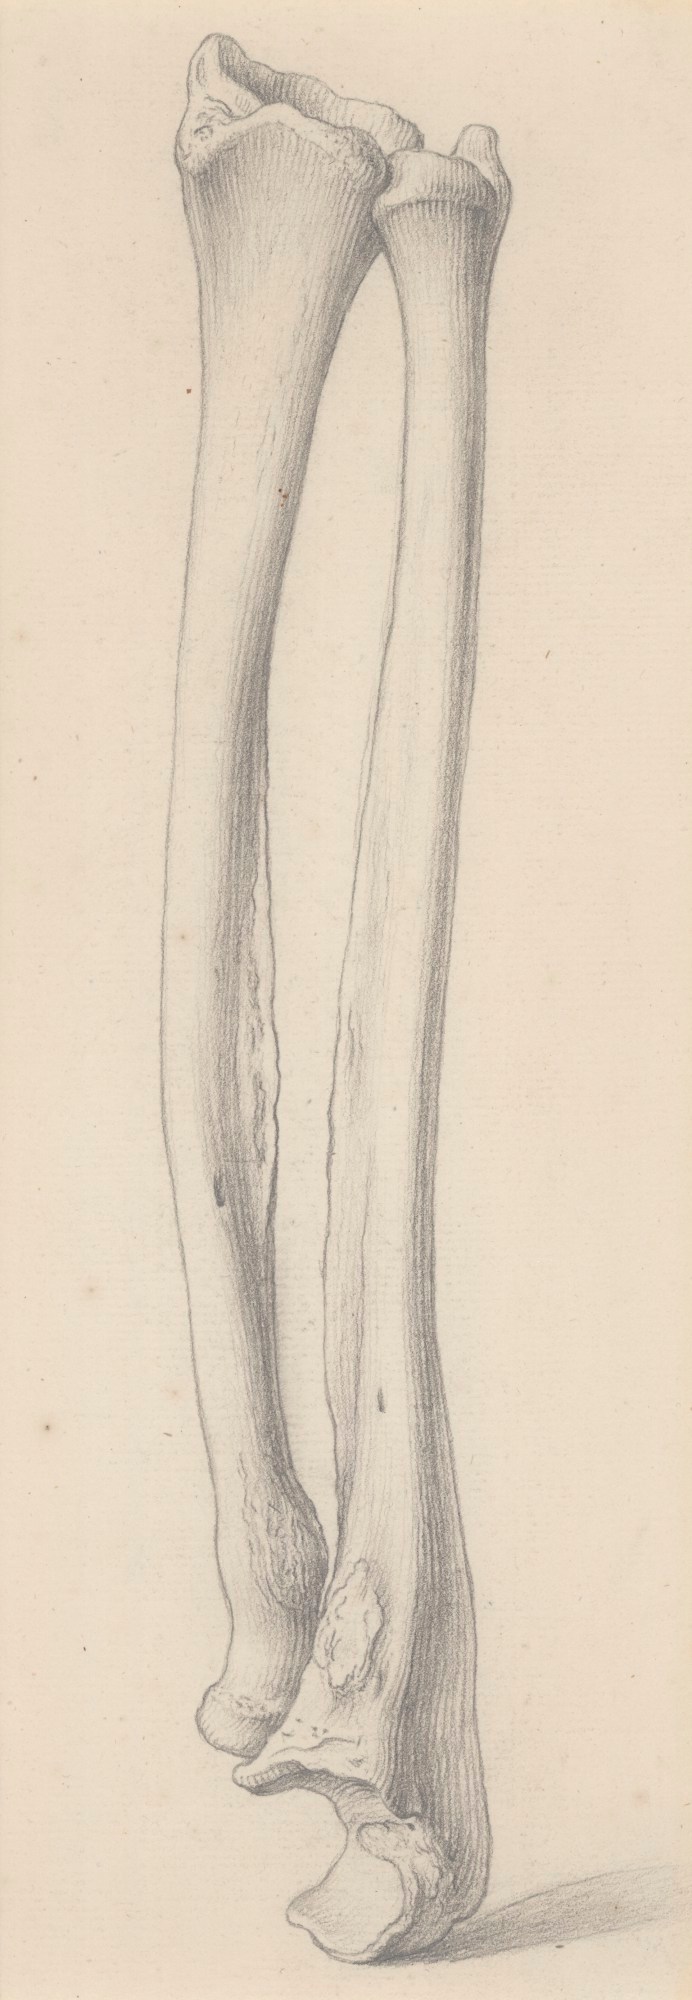 Drawing of the radius and ulna bones fused together, for Cheselden's